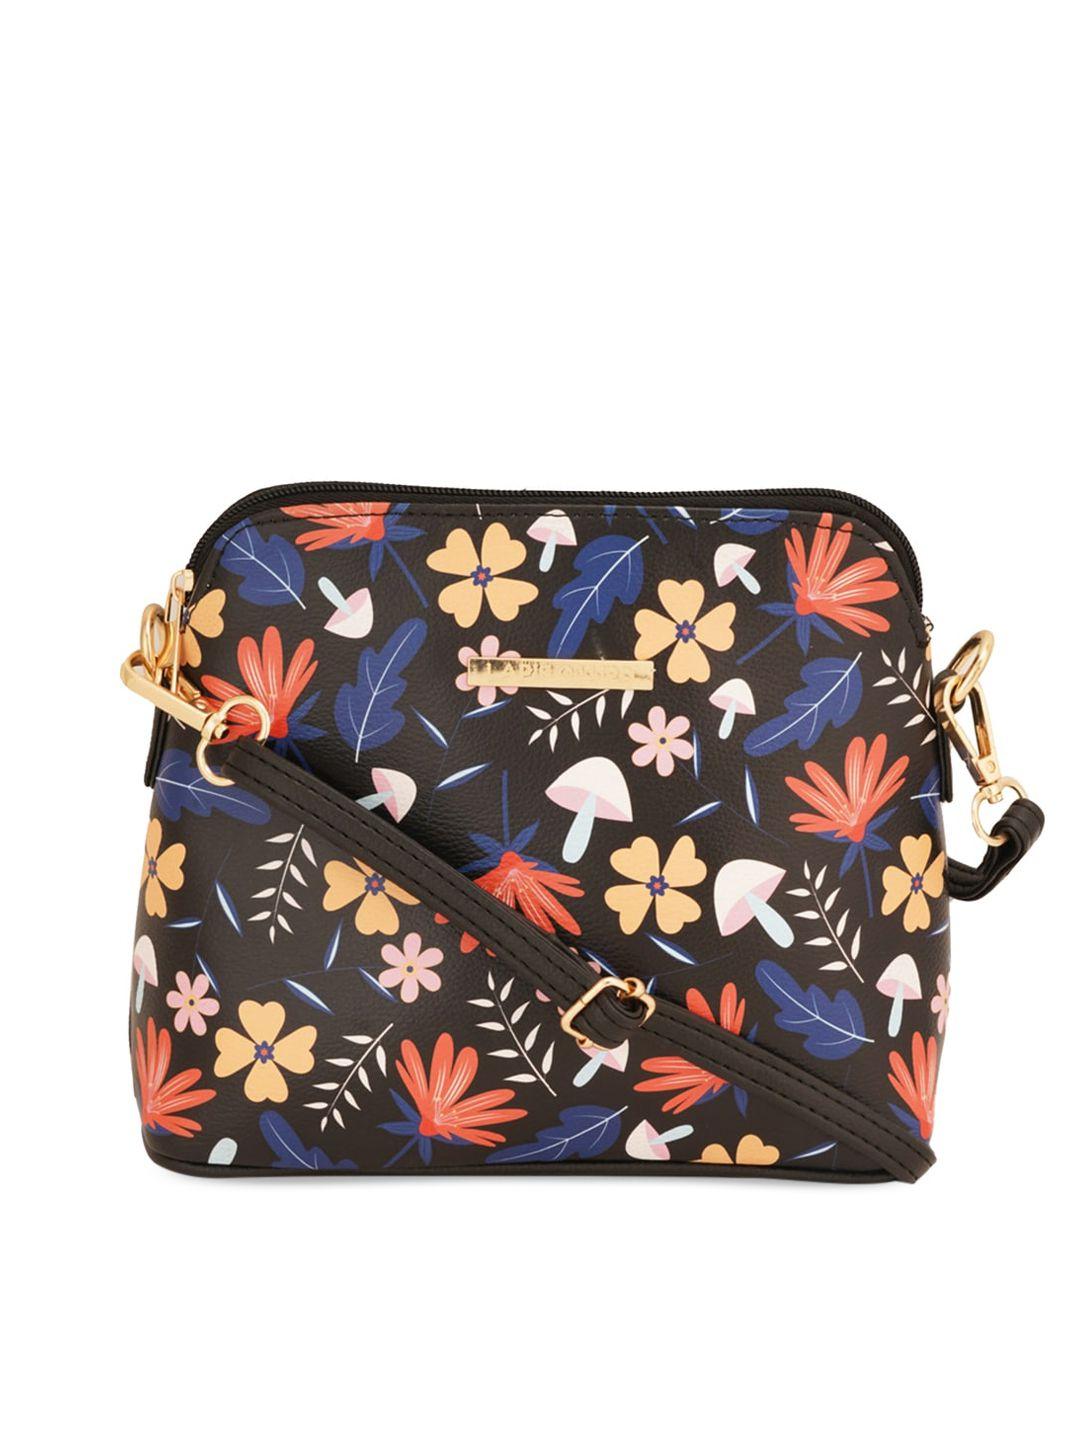 lapis o lupo floral printed structured sling bag